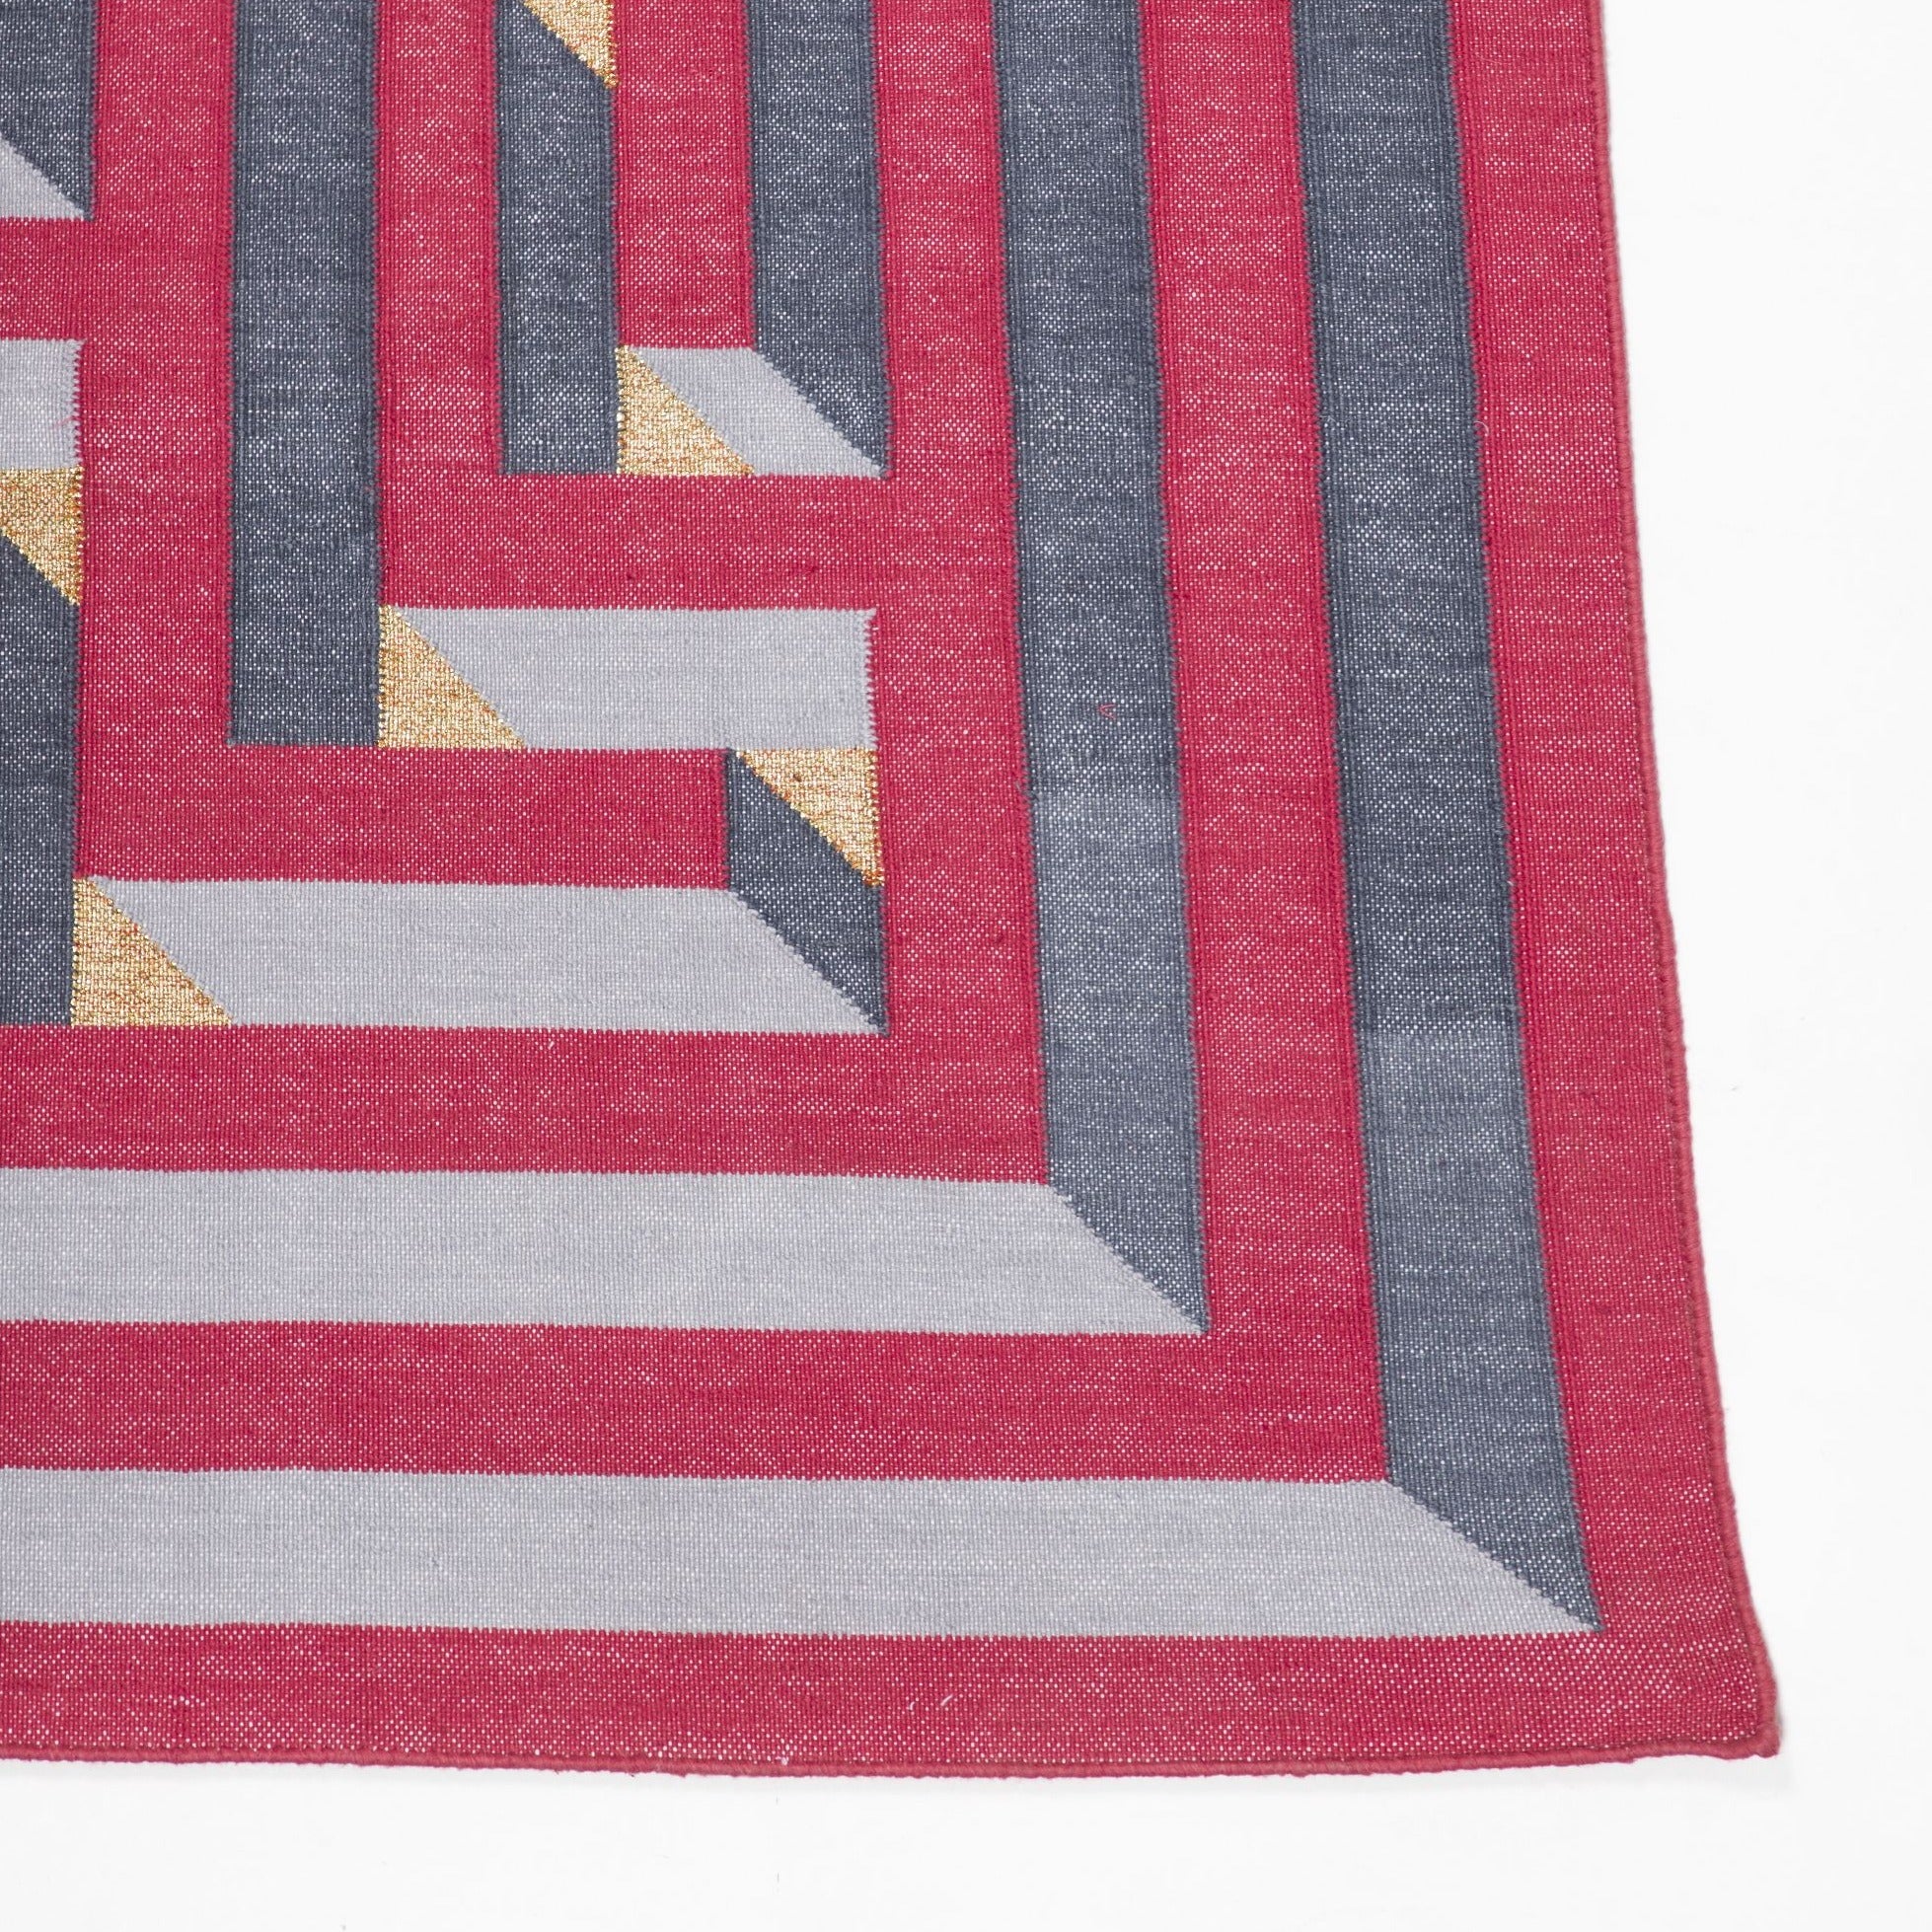 Amaze Dhurrie DEEG Square 5'x5' , Home textiles , Rugs , Carpets , Durrie weaving, handcrafted, made in India, artist